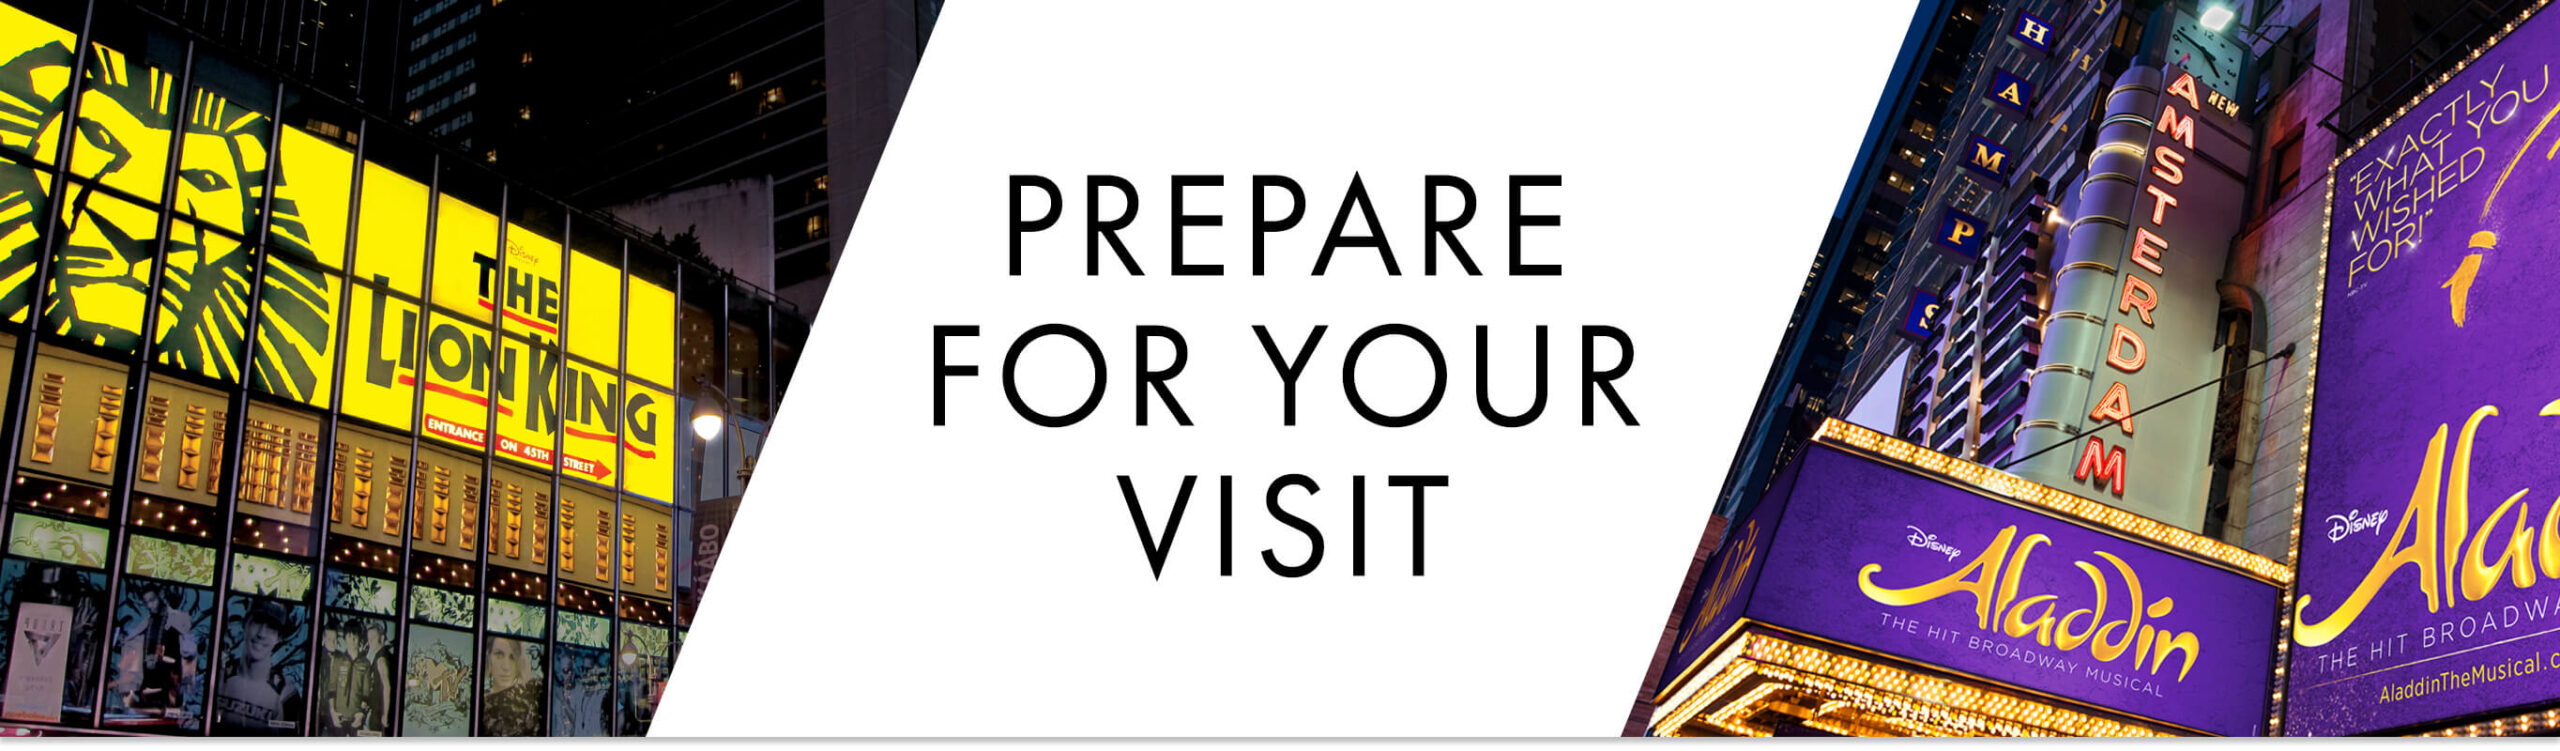 Prepare For Your Visit